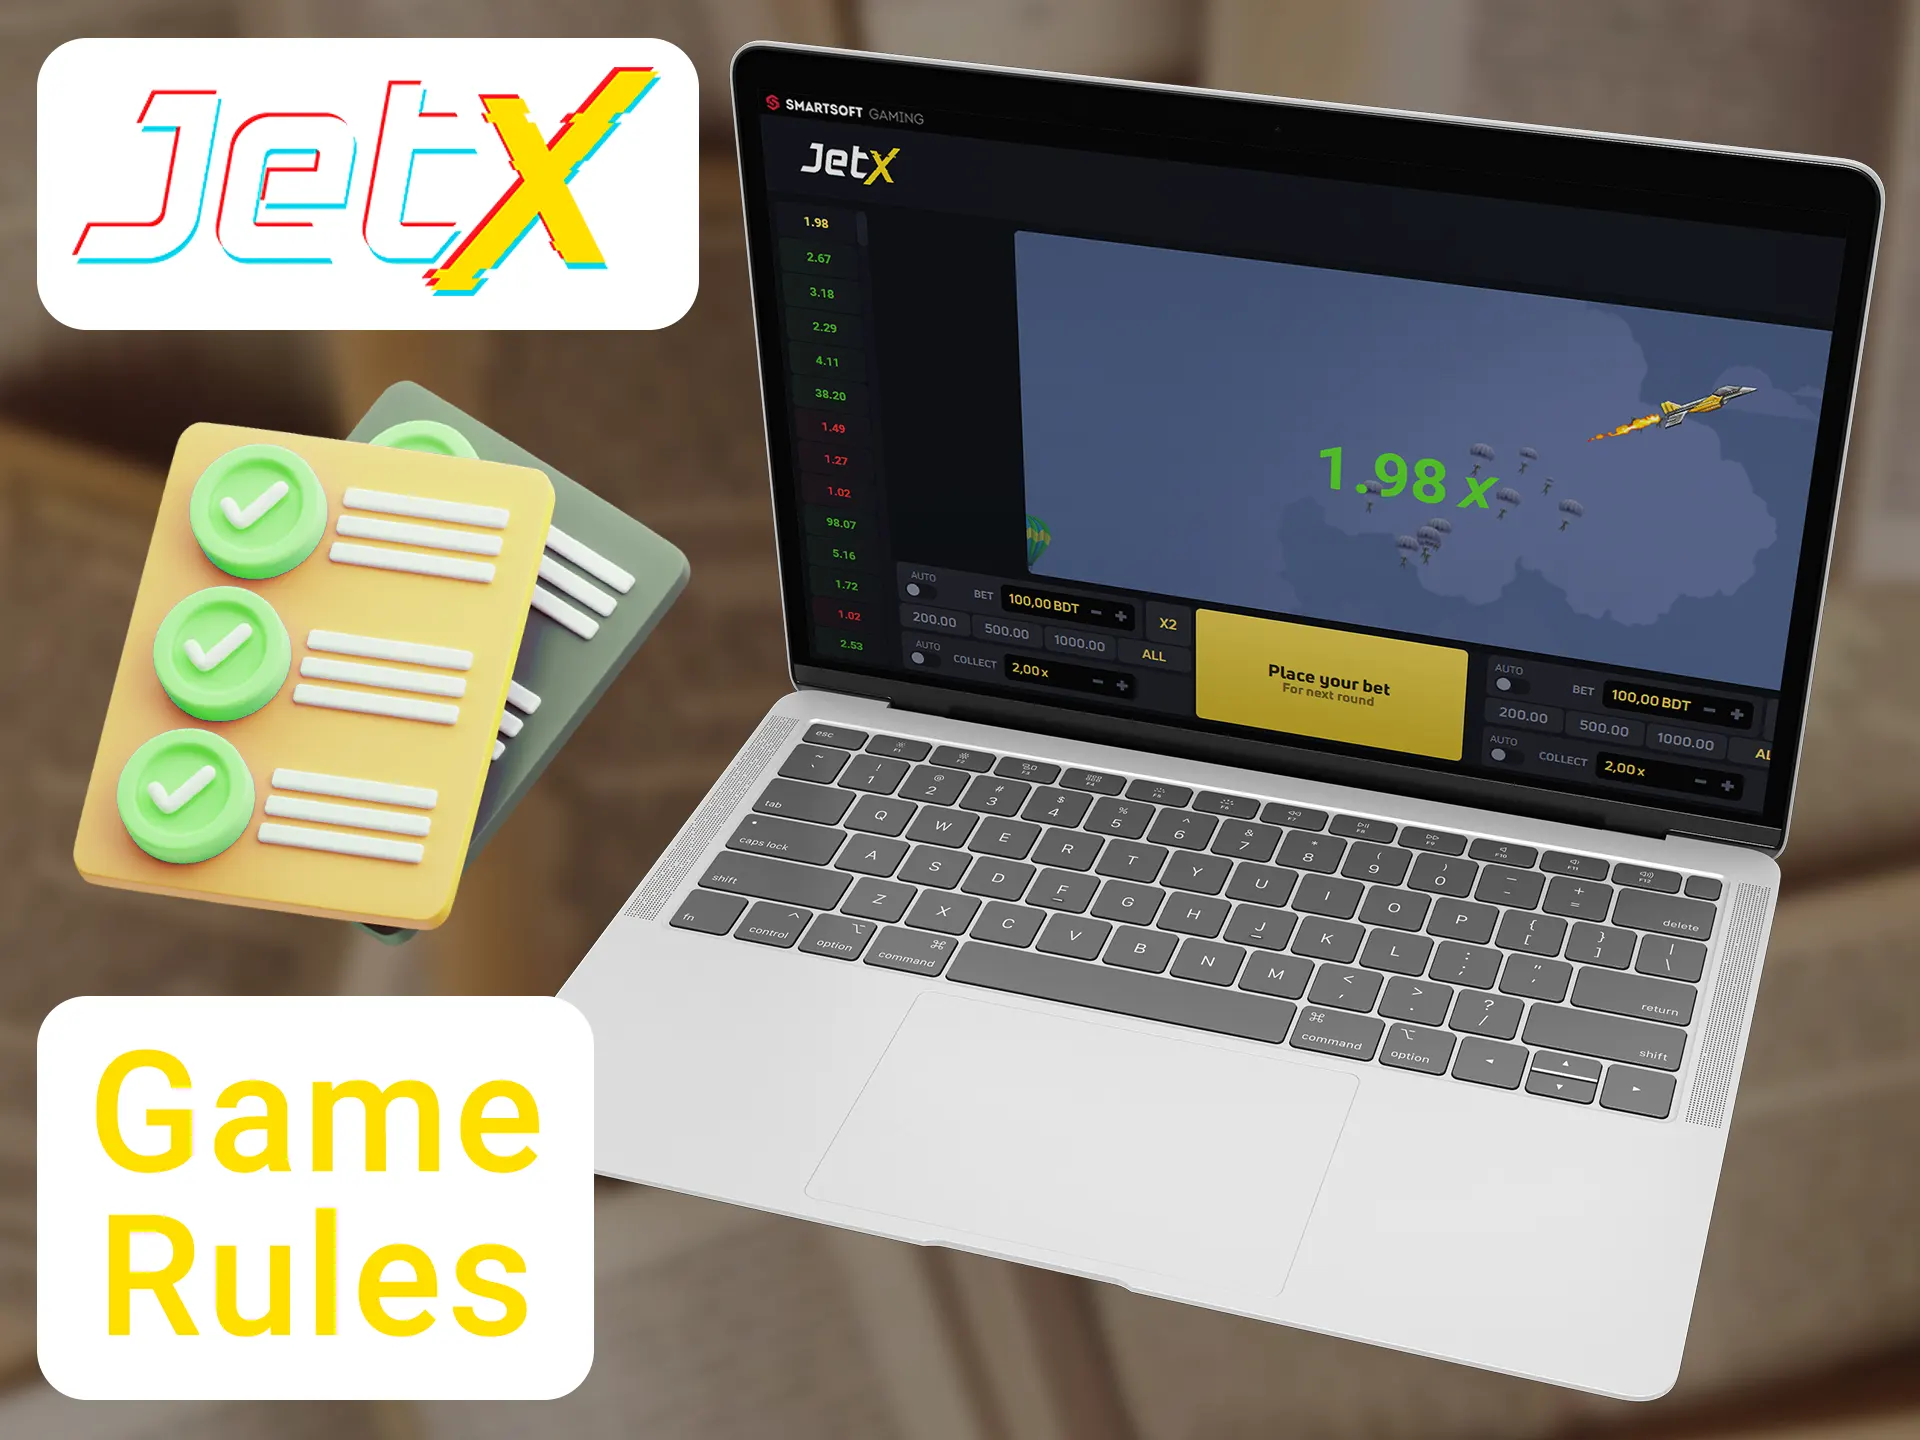 Follow JetX rules when playing it.